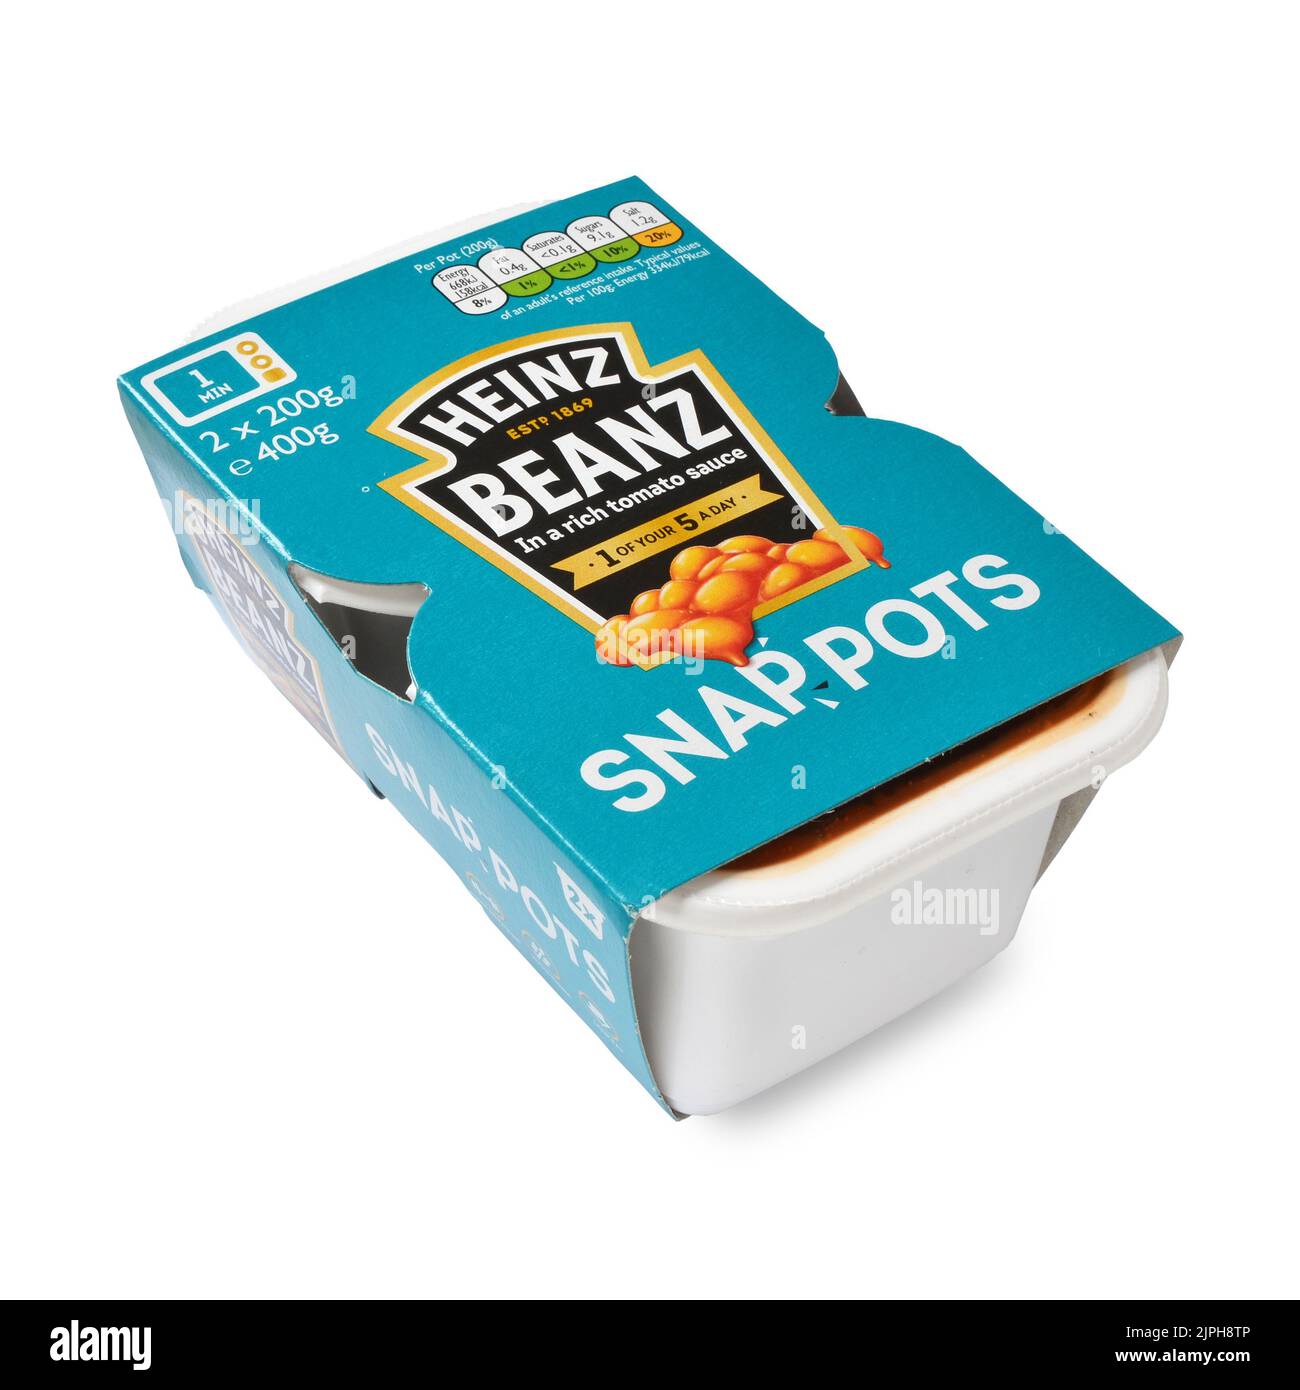 Pack of Heinz Snappots Baked Beans retail packaging on white background cut out Stock Photo